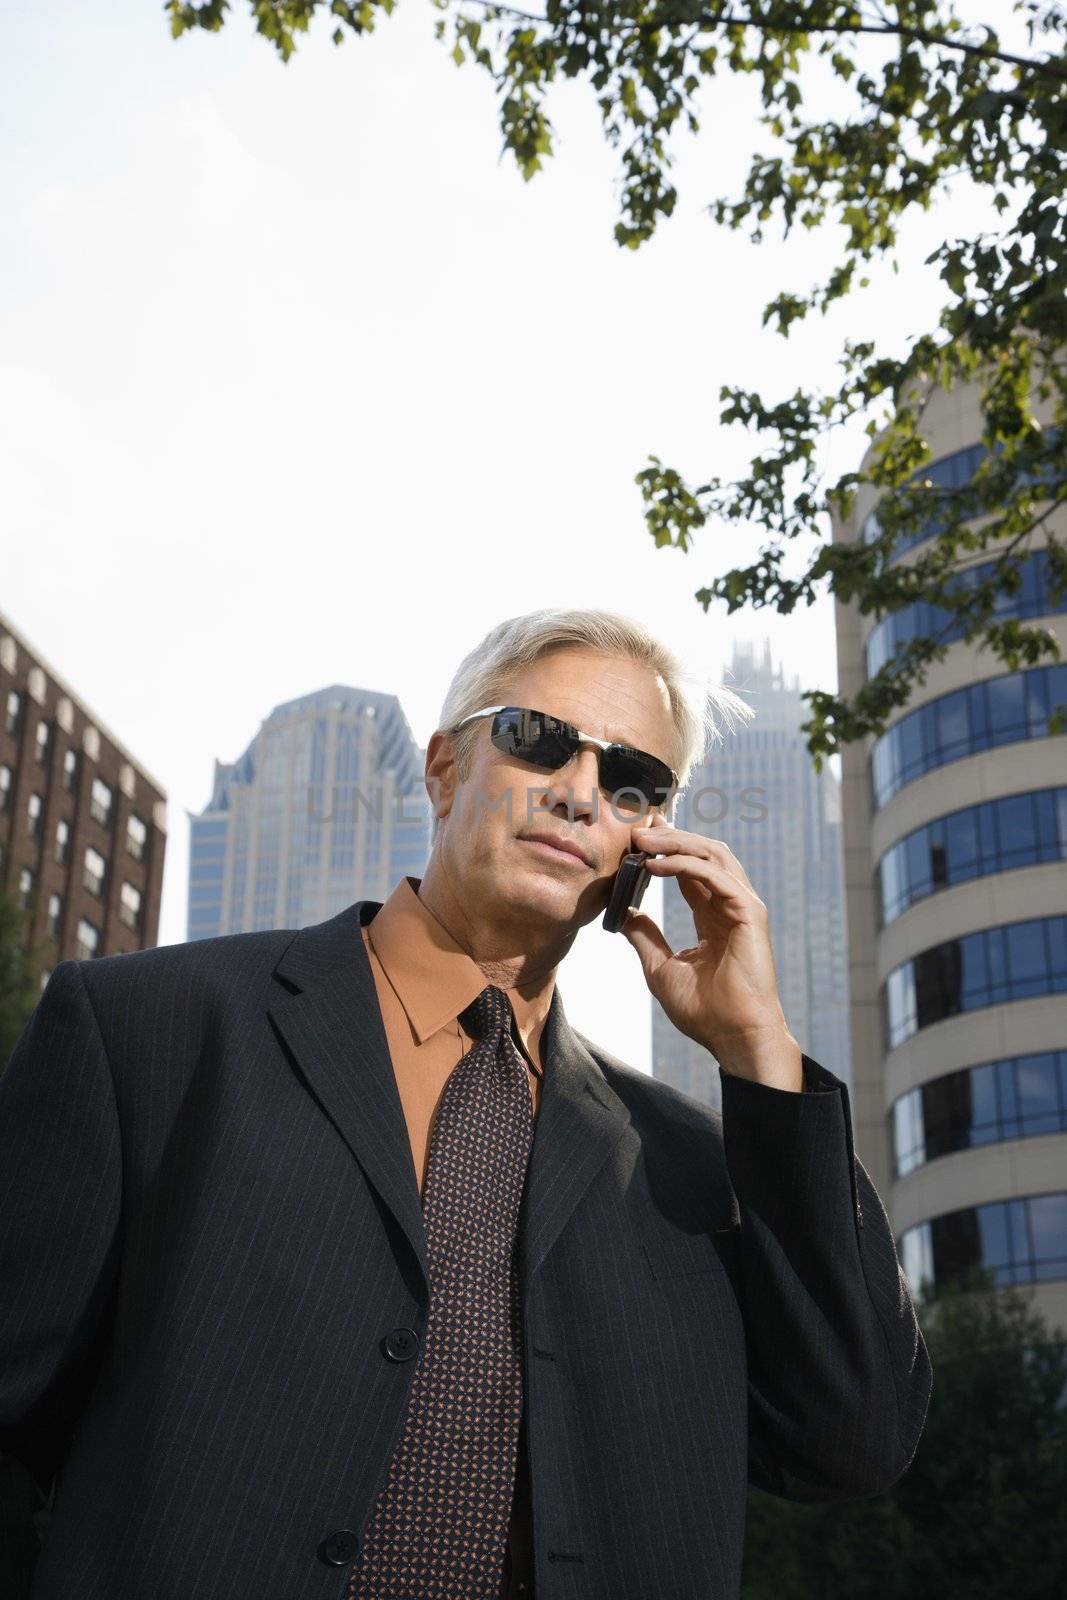 Caucasian middle aged businessman in sunglasses talking outdoors on cell phone.